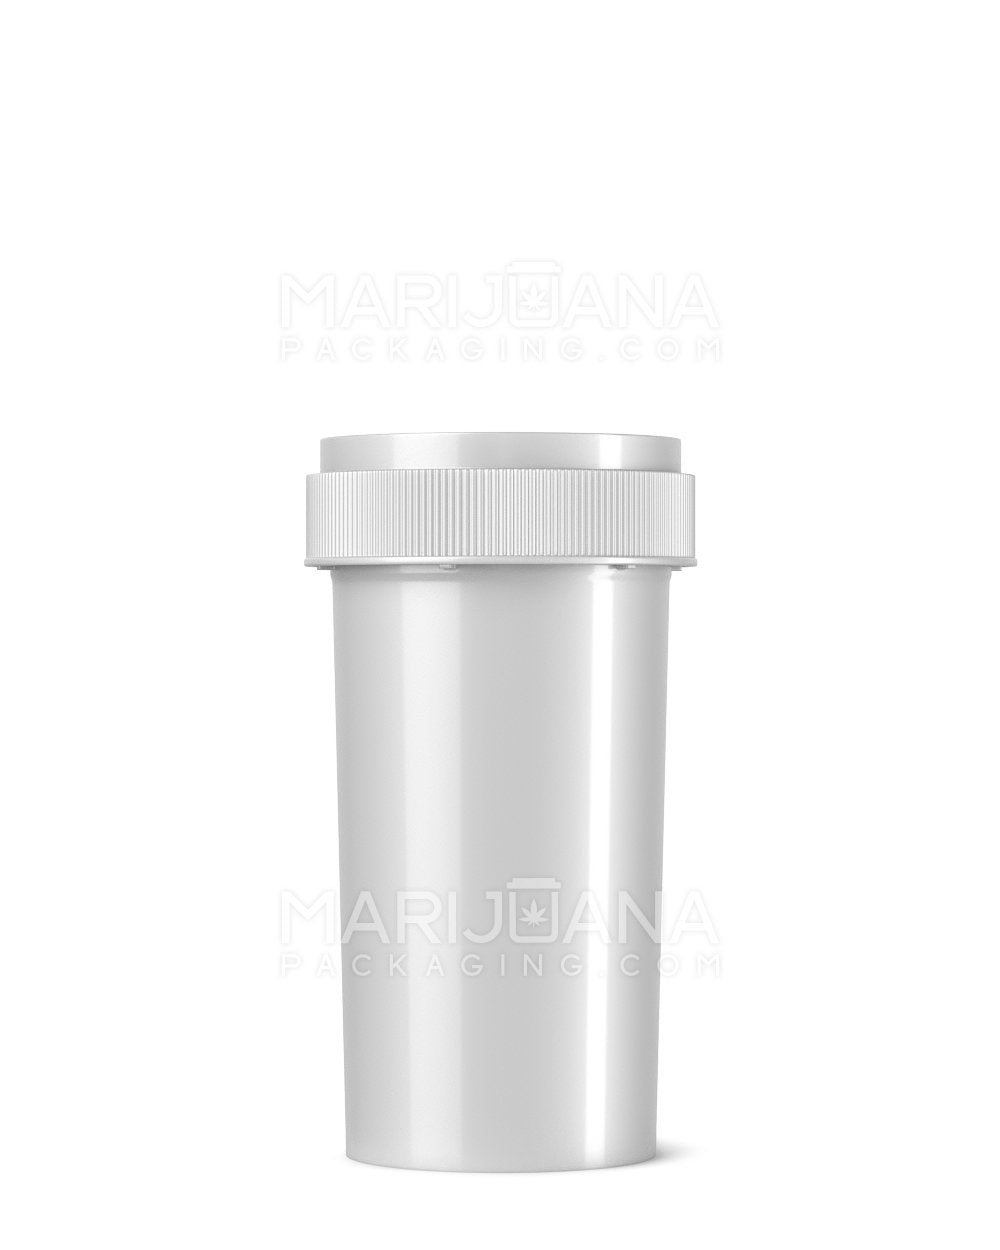 Child Resistant Opaque Silver Blank Reversible Cap Vials | 40dr - 10g | Sample - 1